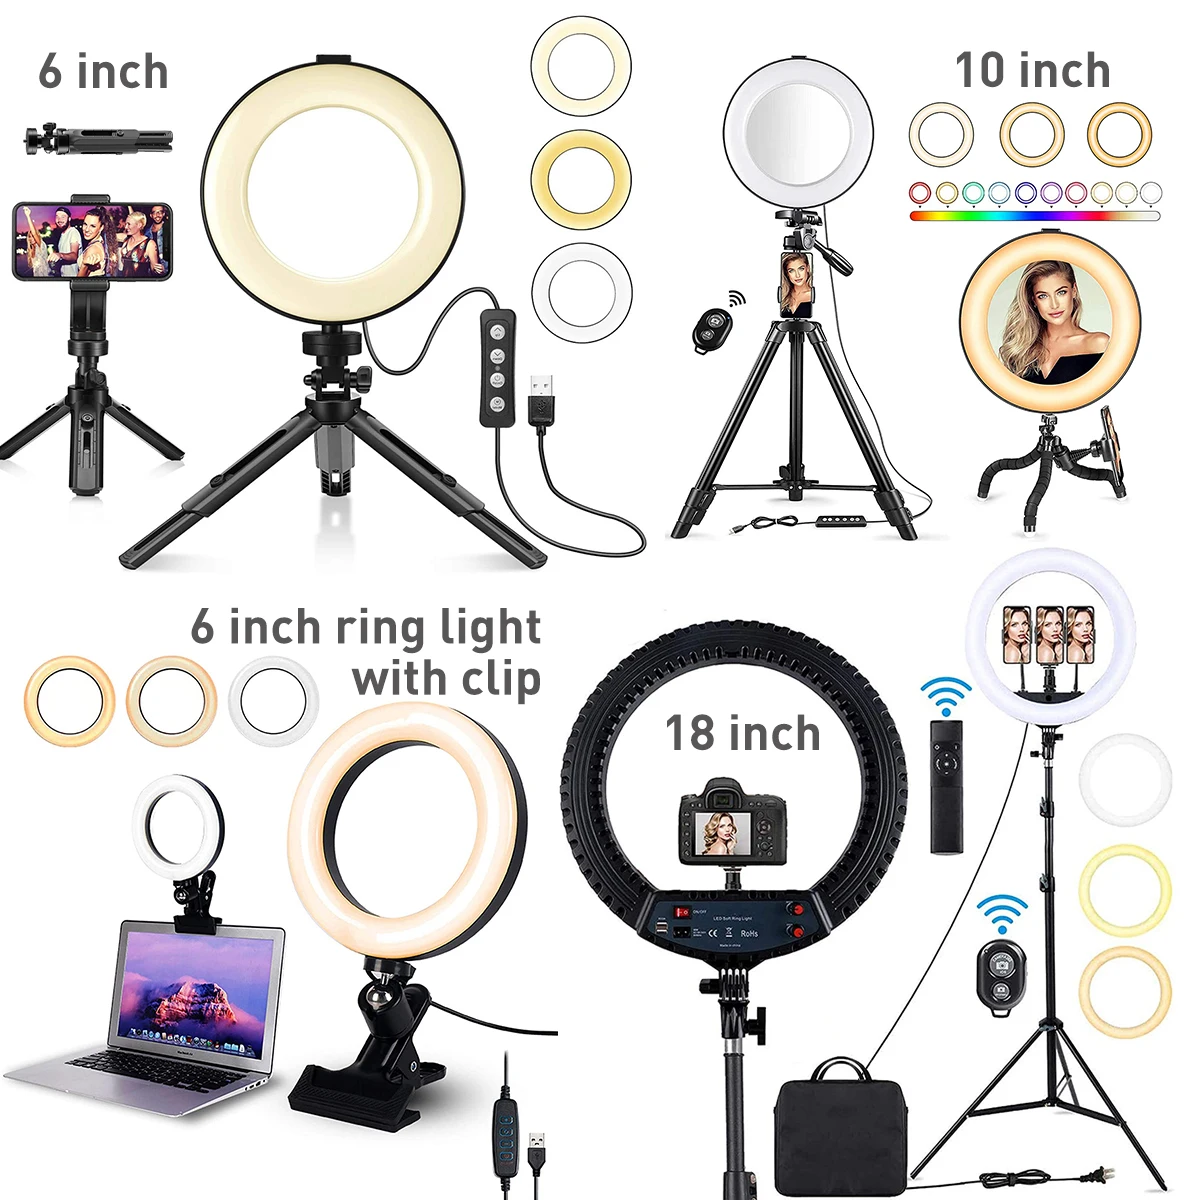 

Professional Live Broadcast 10inch 26cm LED Ring Lamp Dimmable Makeup Fill Light Ringlight Tripod Set 26 CM 10 Inch Ring Light